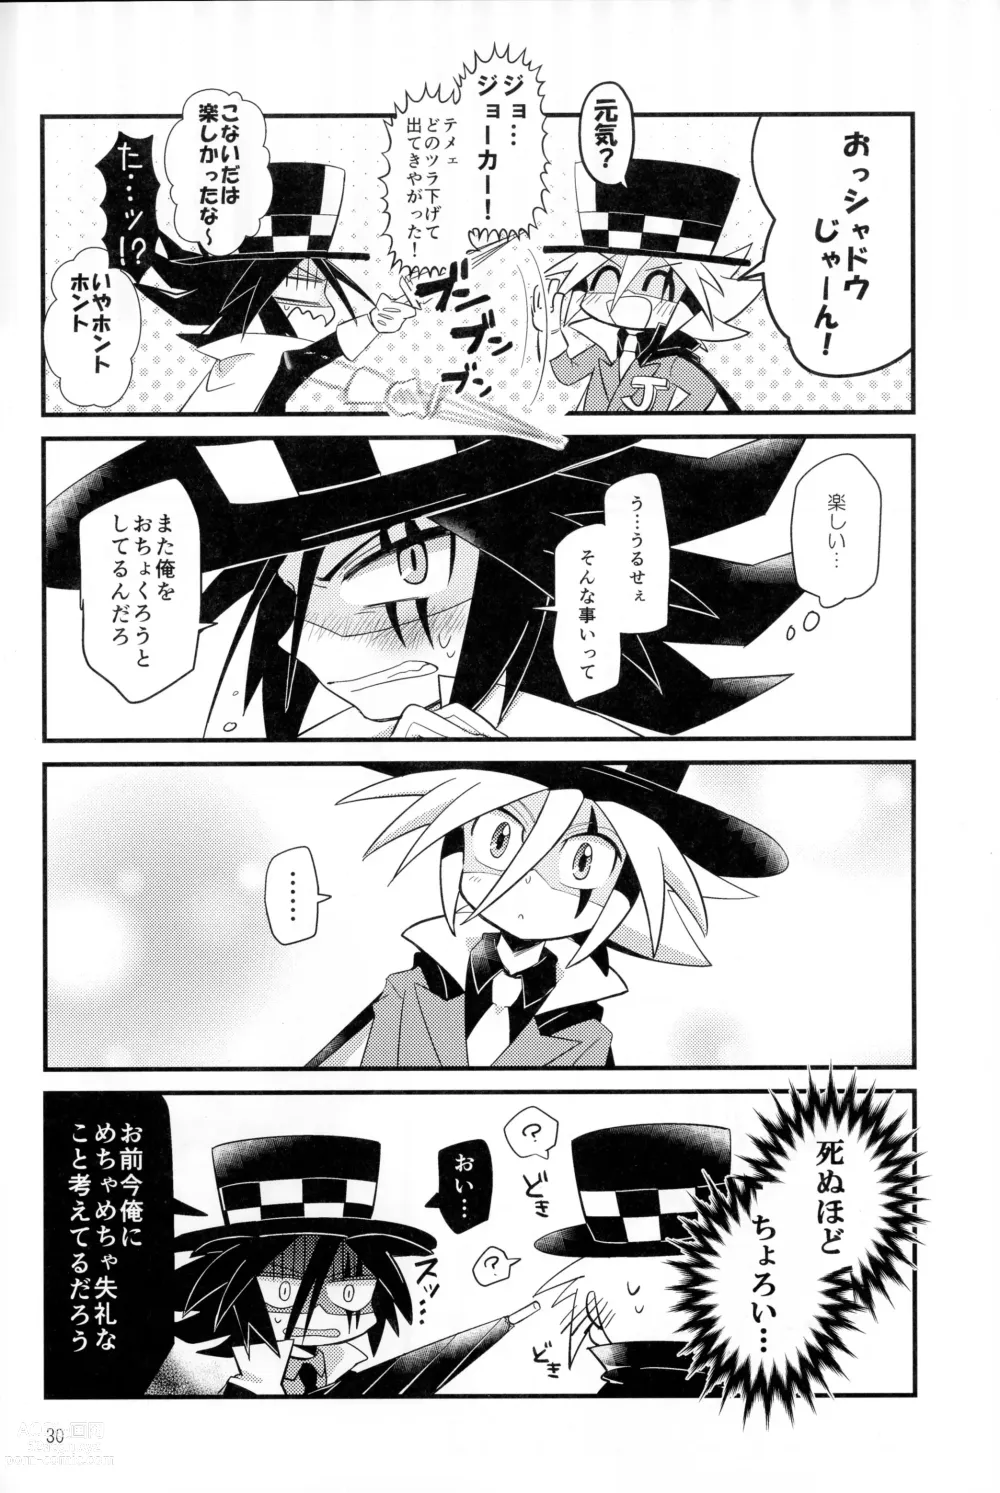 Page 26 of doujinshi IT IS FAIL!